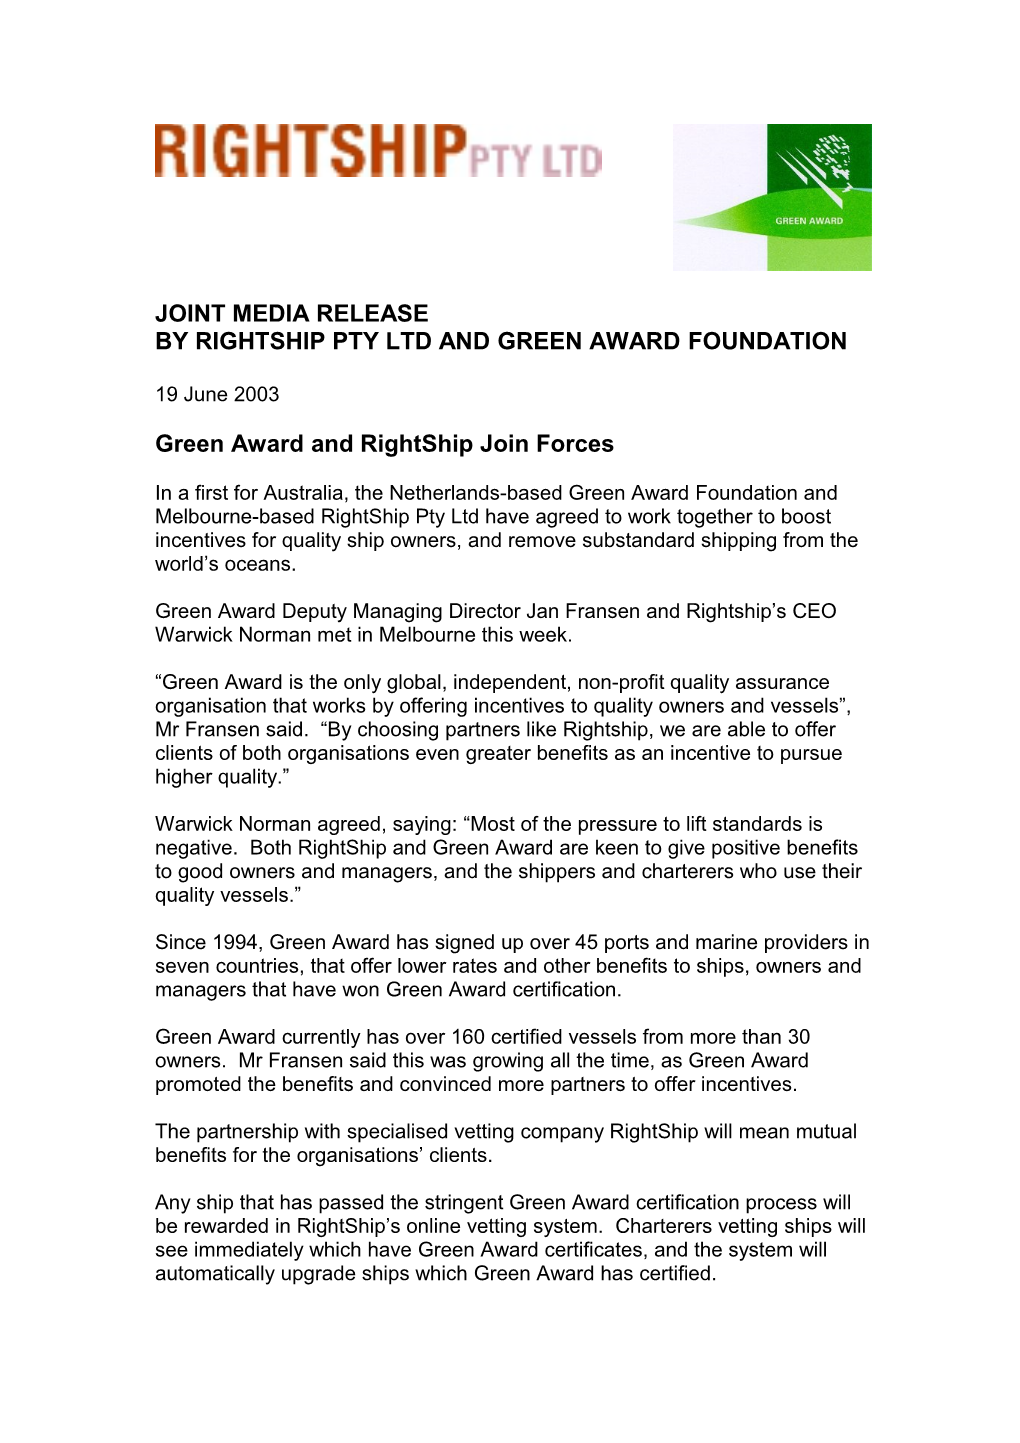 In a First for Australia, the Netherlands Based Green Award and the Melbourne Based Rightship